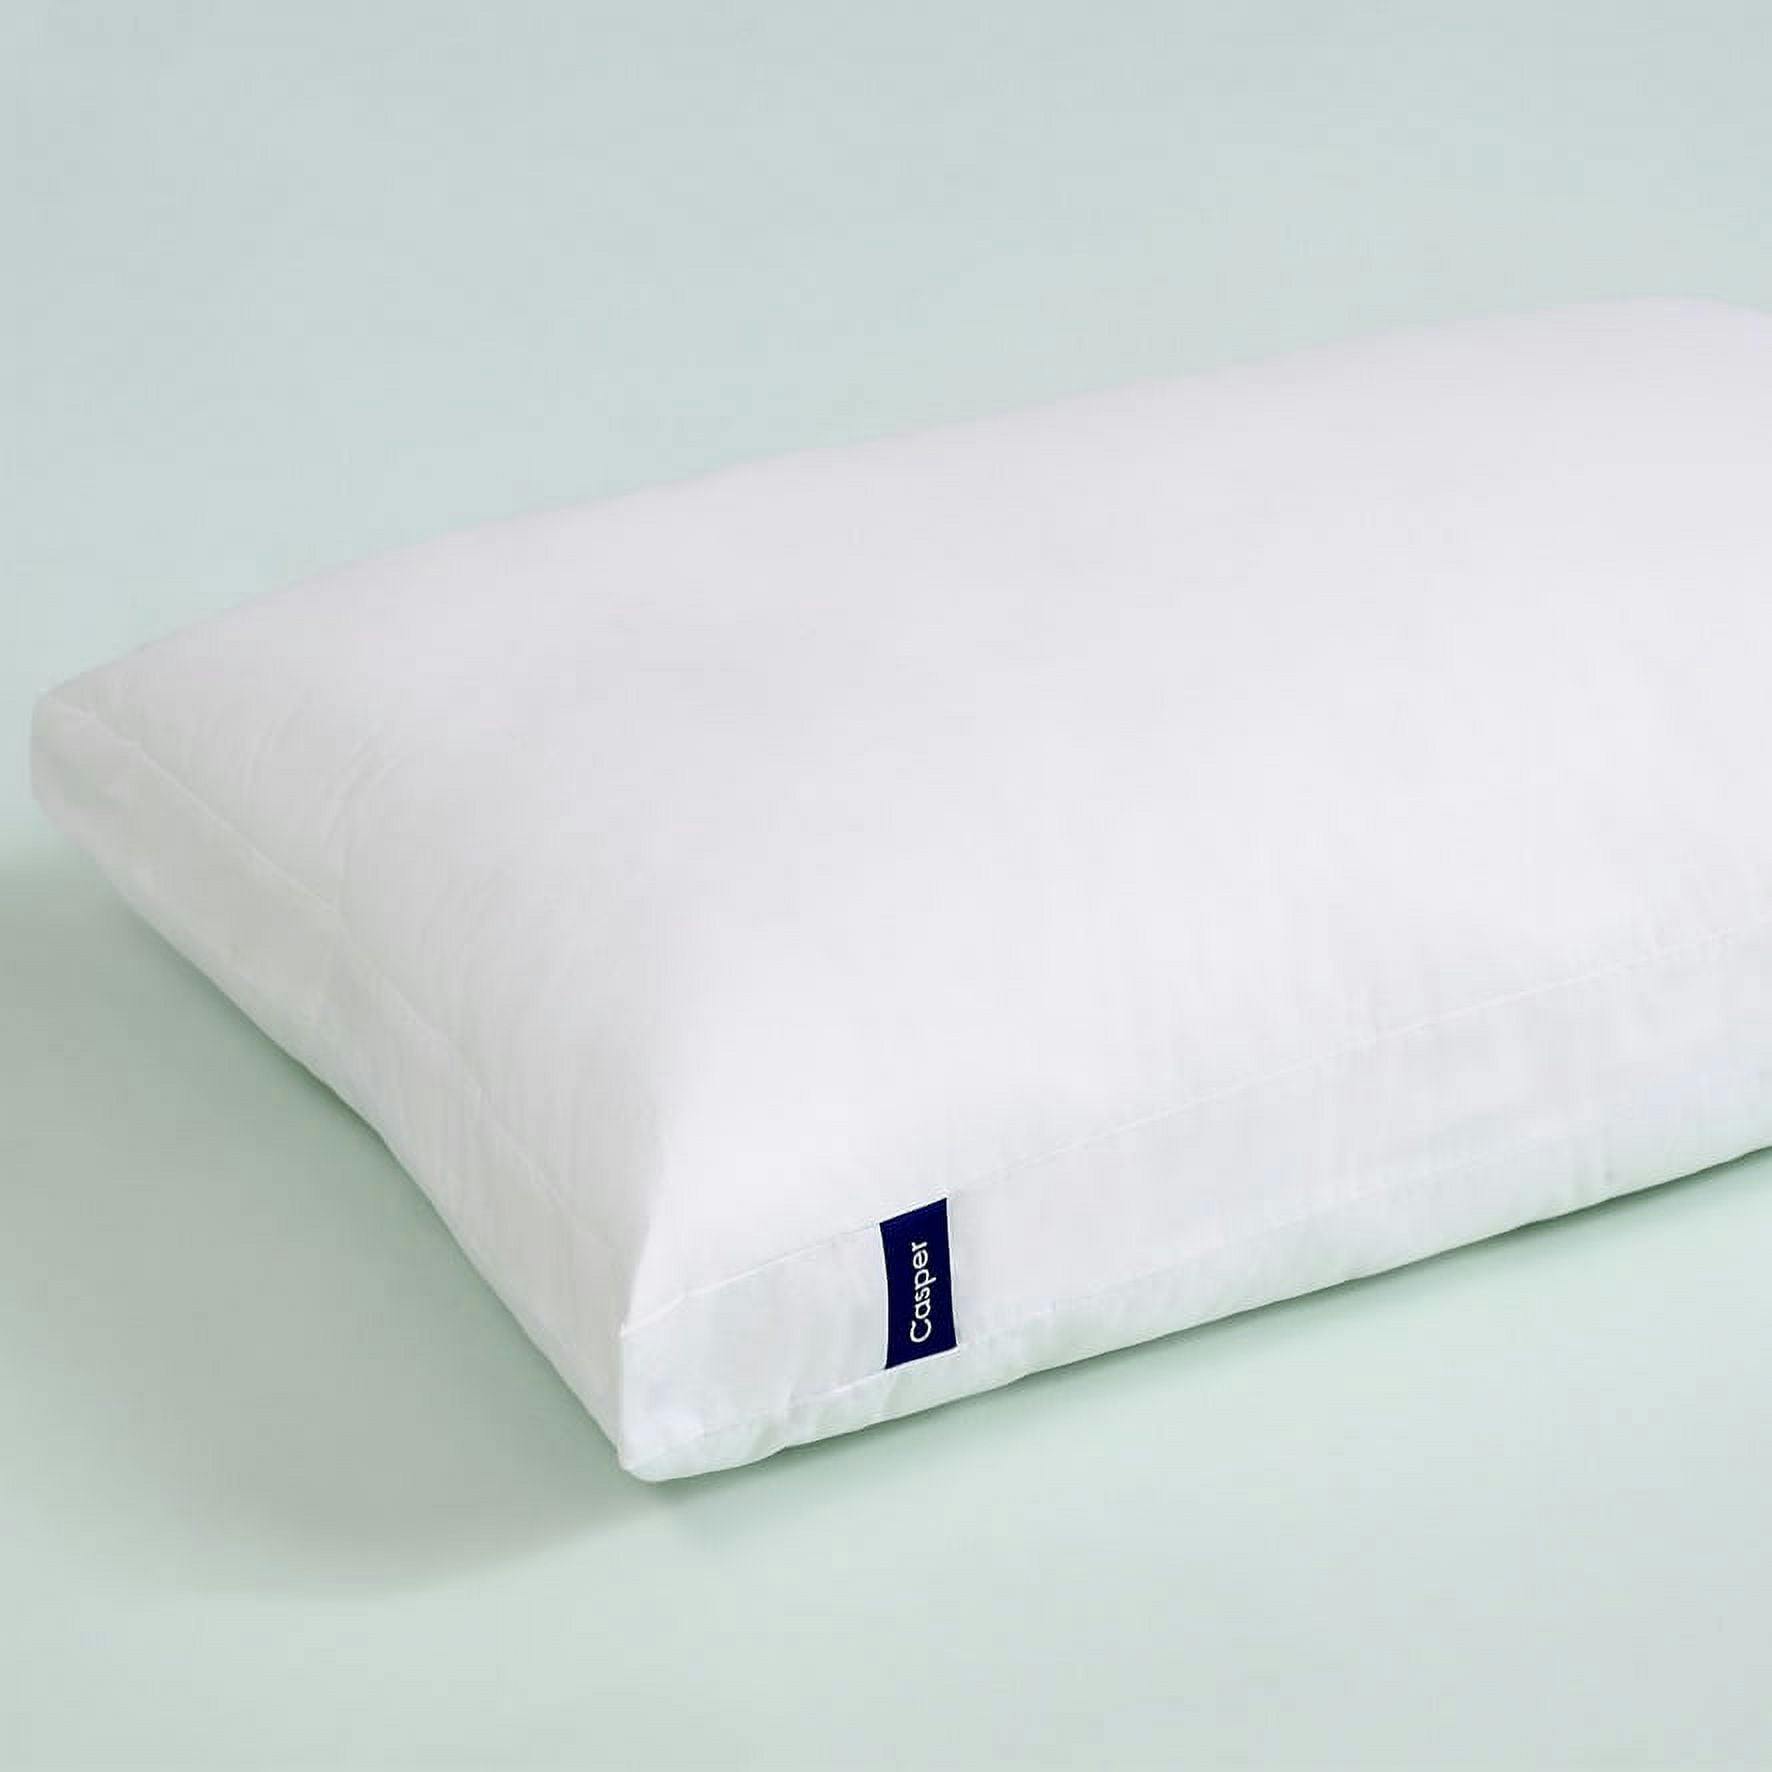 Dual-Comfort Standard Polyester Pillow with Breathable Percale Weave